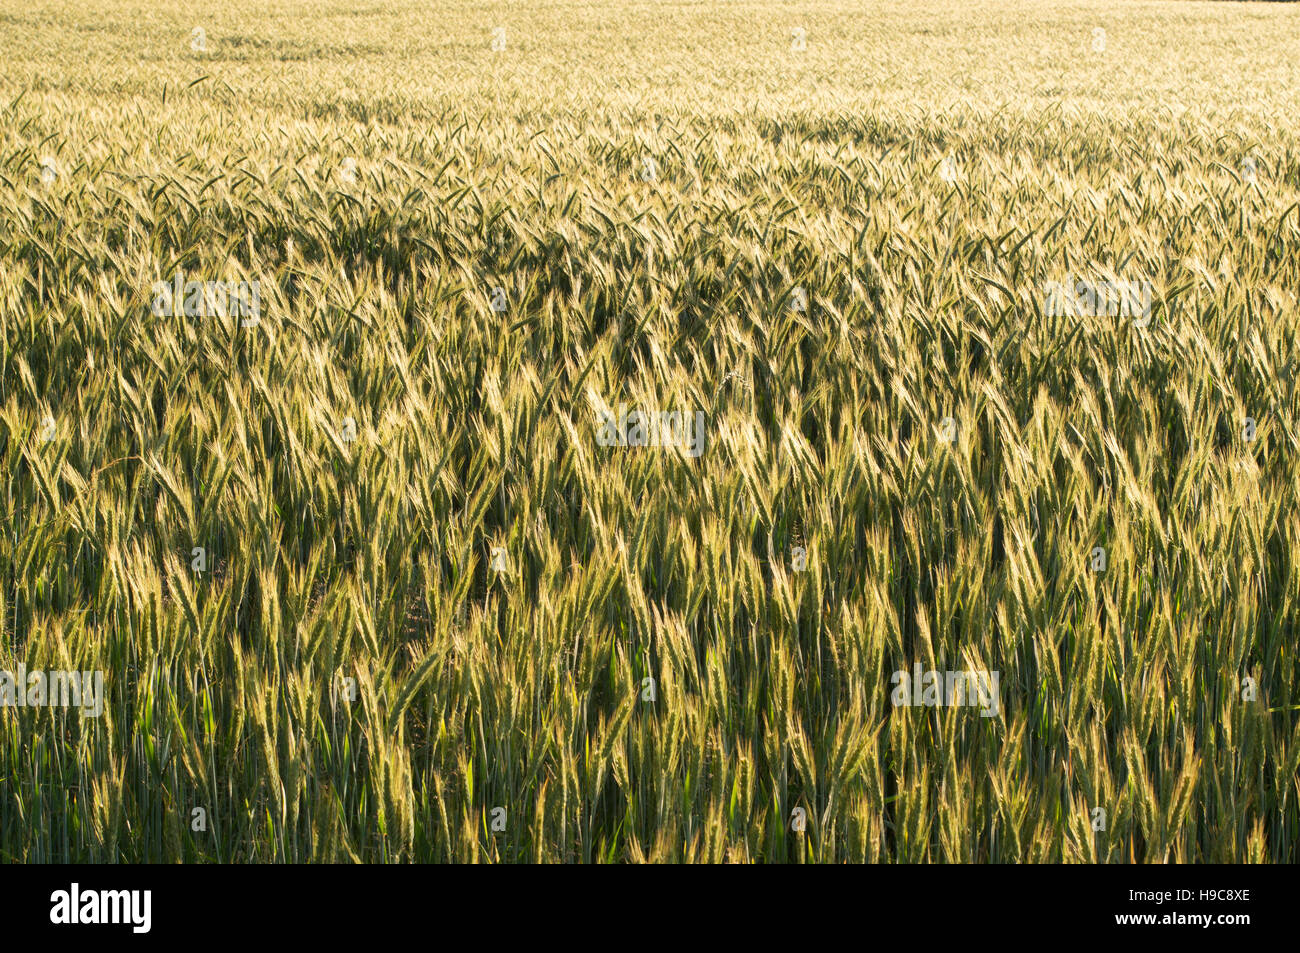 A field of barley cereal crop Stock Photo